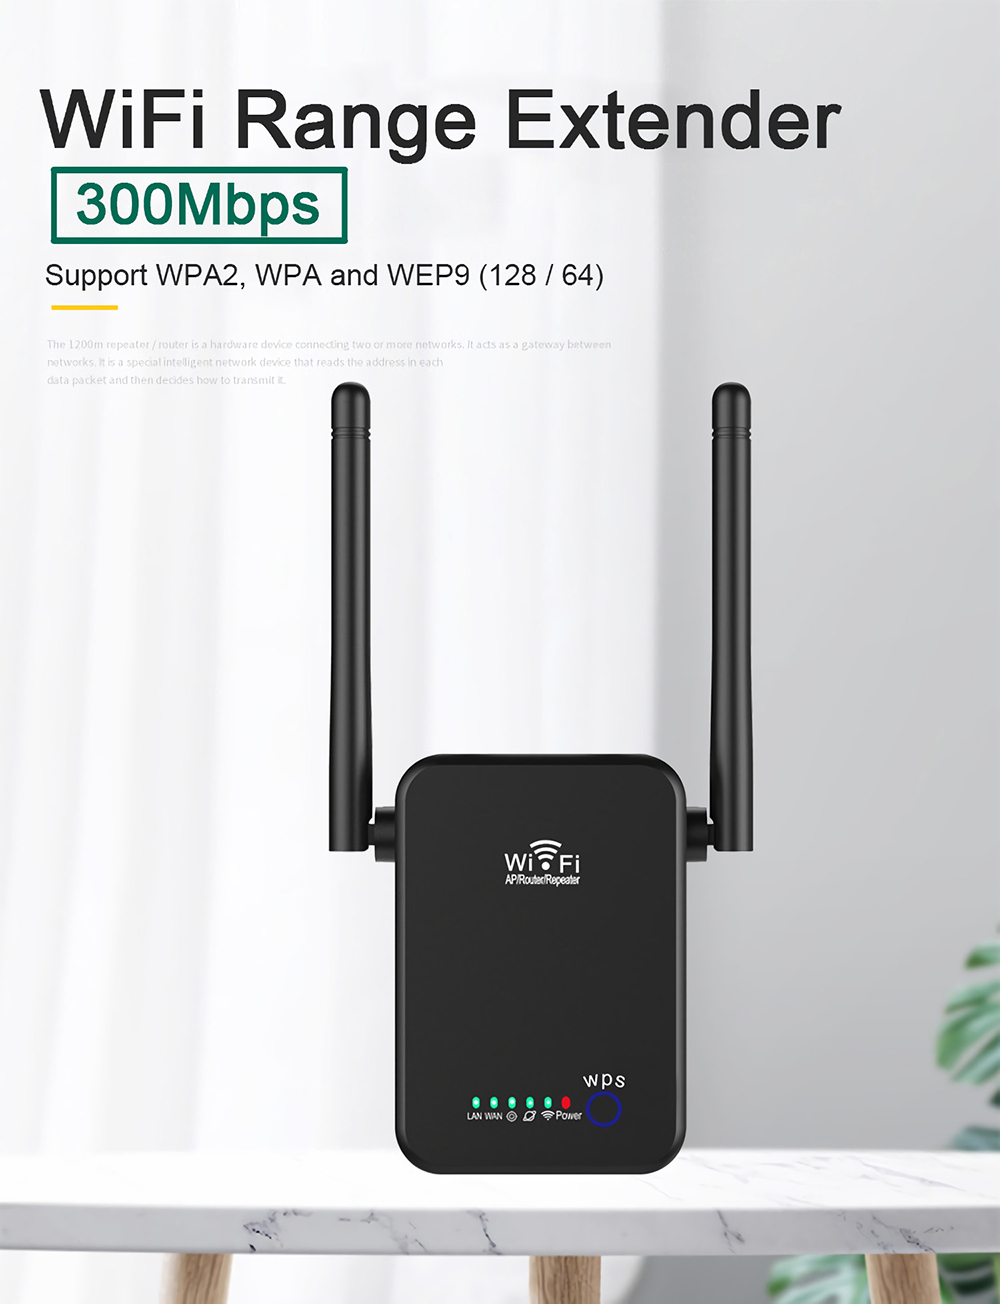 Urant-300Mbps-Mini-WiFi-Booster-24GHz-Wireless-Range-Extender-Repeater-Wireless-AP--Router-UNT-6-1905747-1